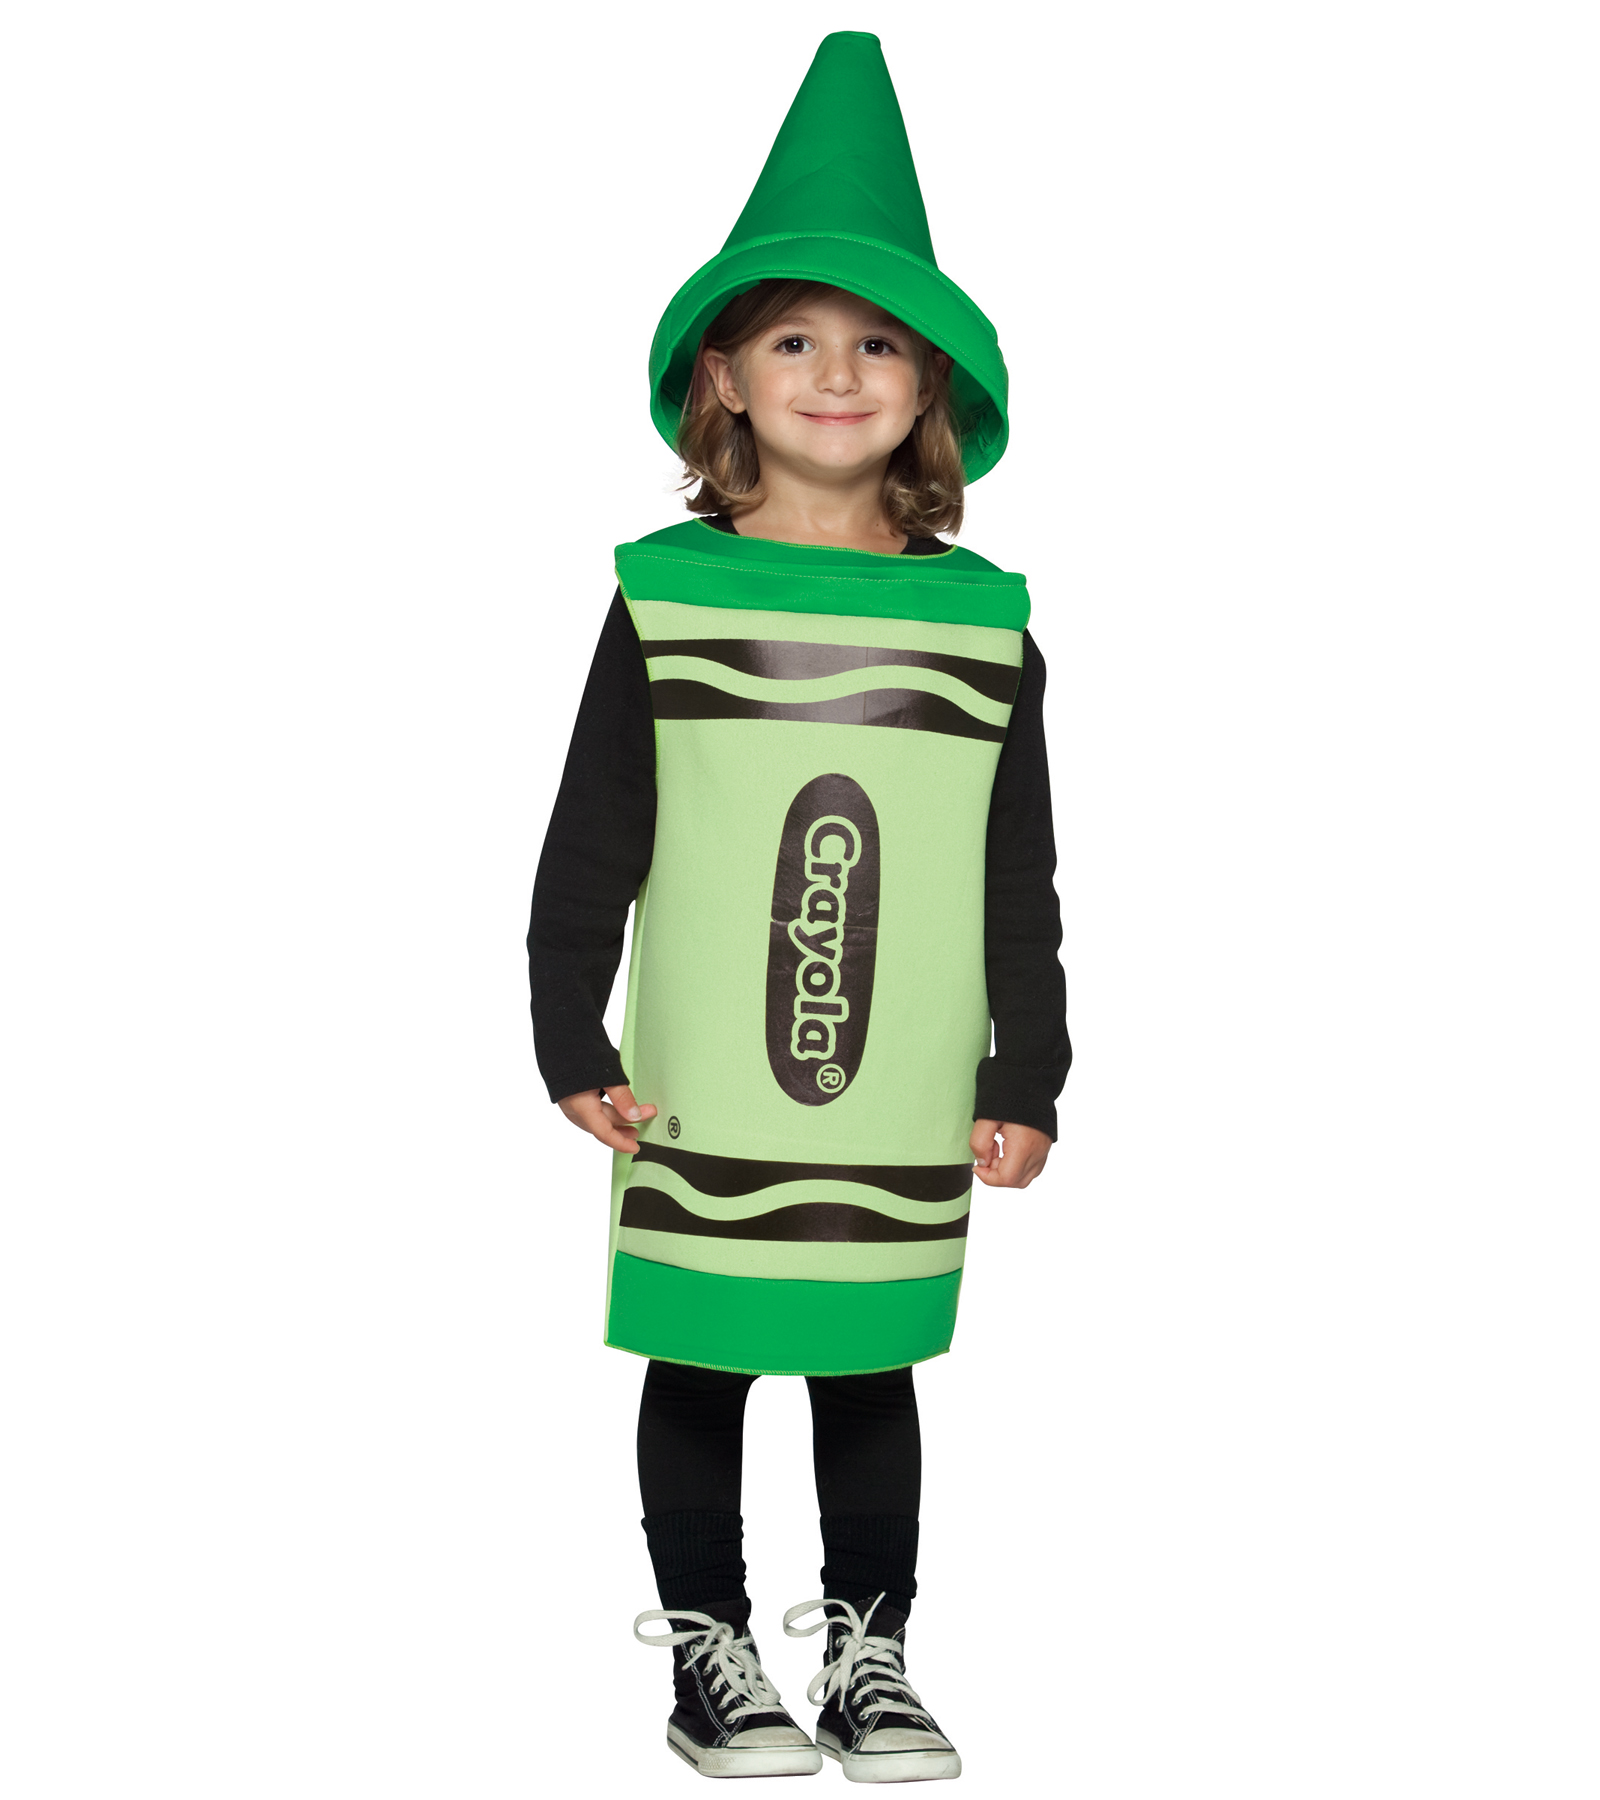 Toddler Crayola Green Halloween Costume Size: 3T-4T